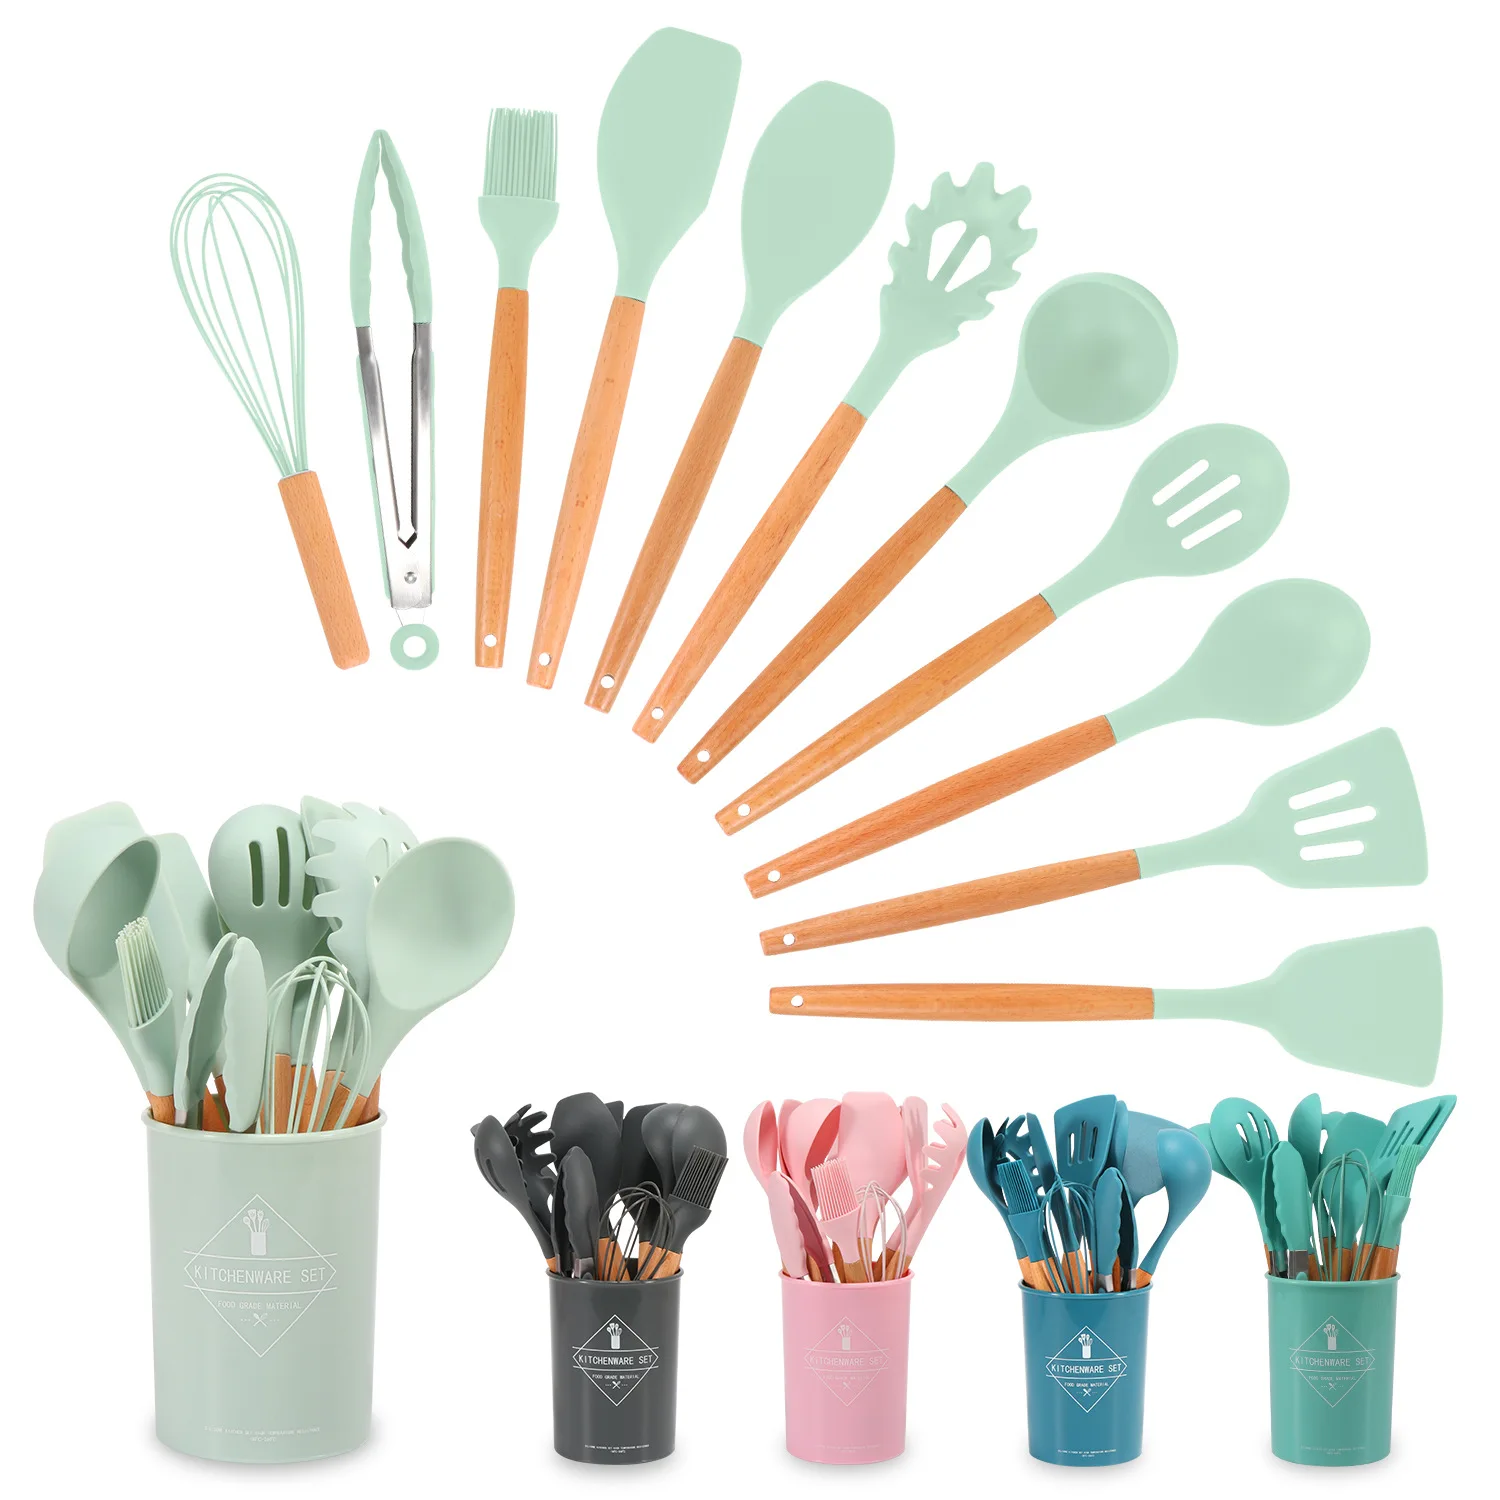 2PCS Silicone Kitchen Cooking Utensil Set for Countertop,Wooden Cook  Gadgets Kitchen Utensils